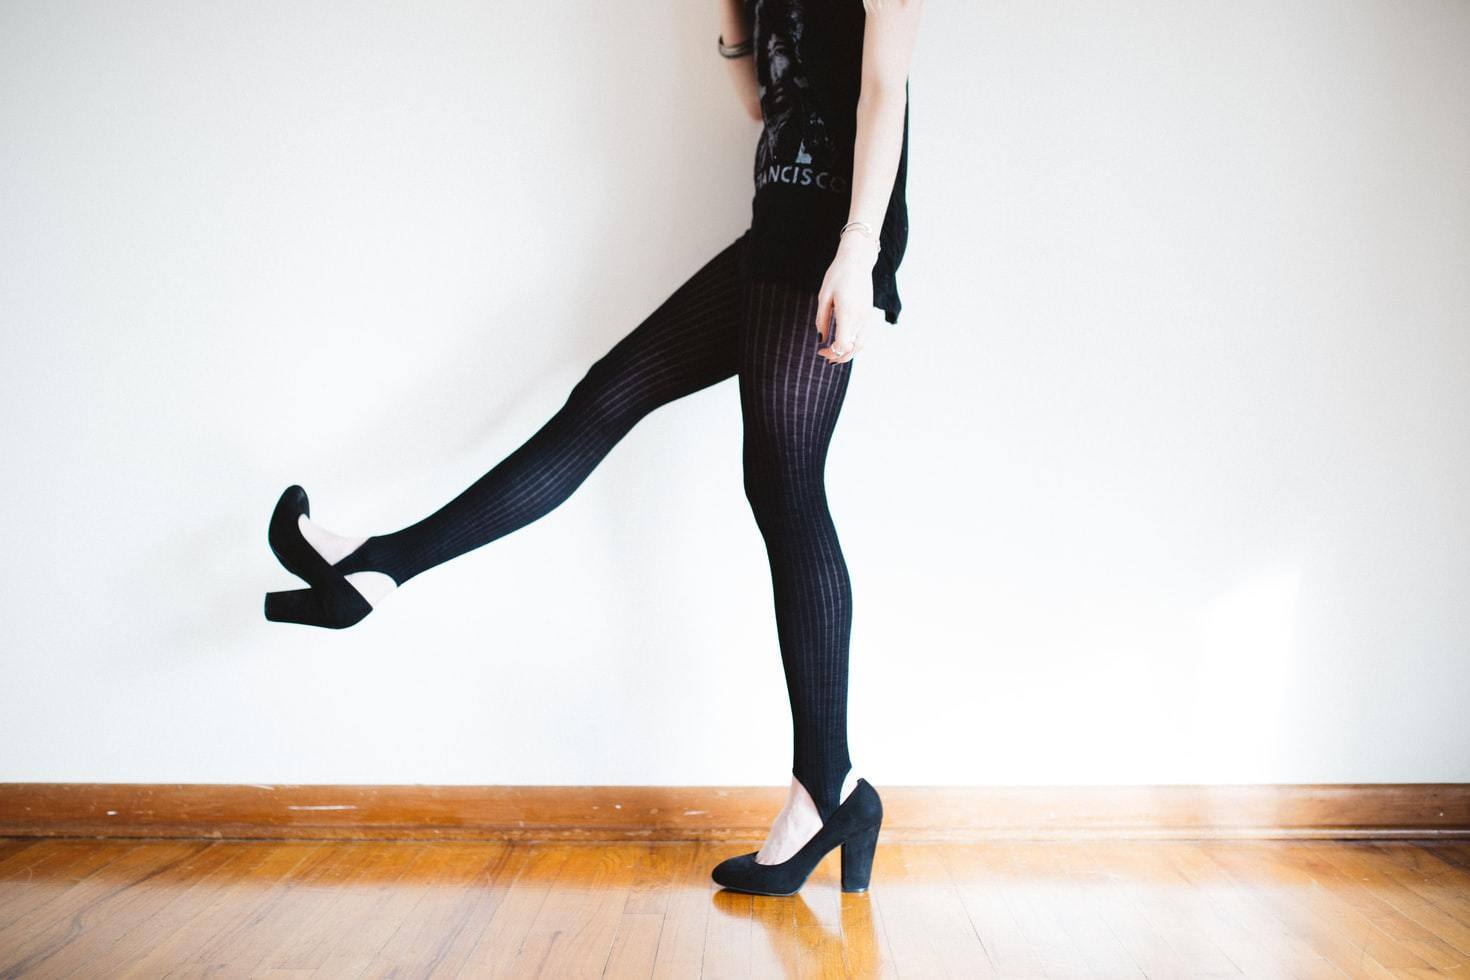 Dance Tights vs Normal Tights: What's the difference? – IKAANYA